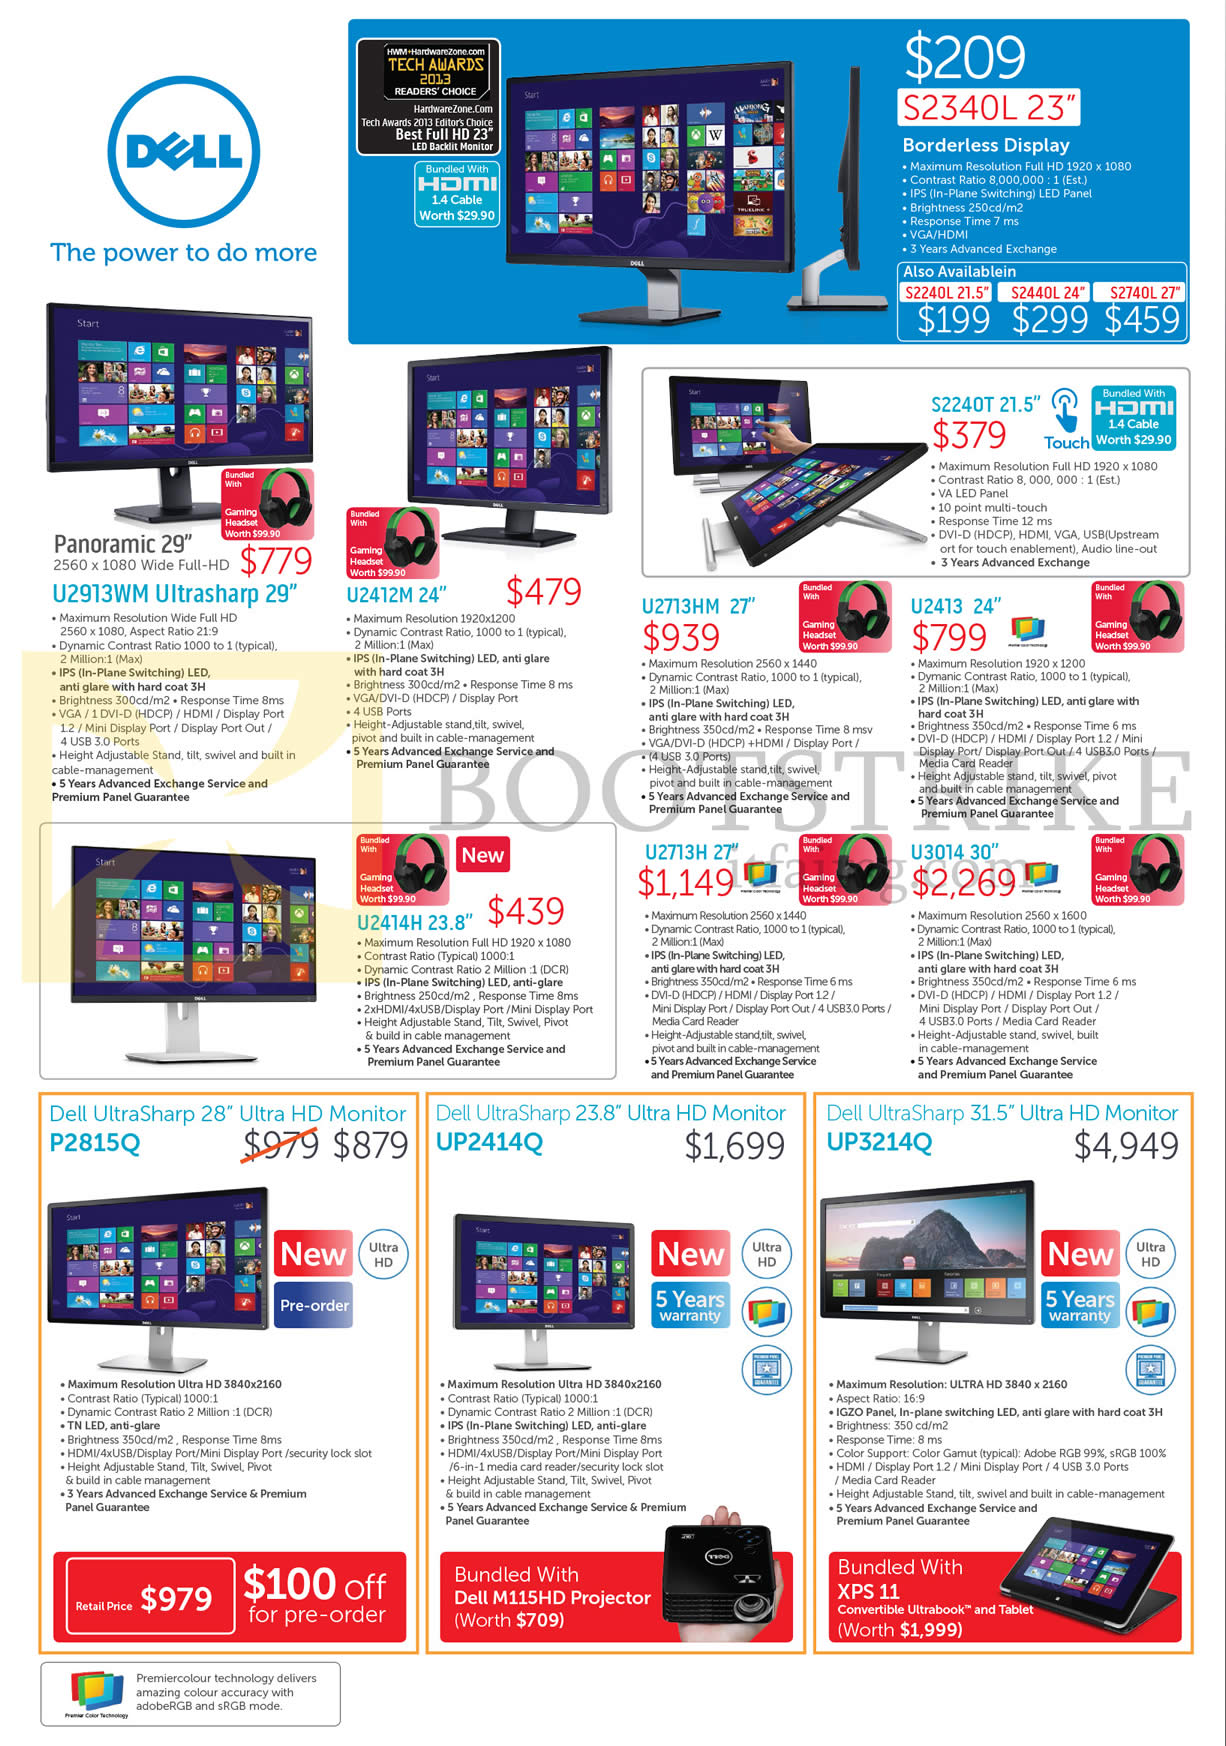 IT SHOW 2014 price list image brochure of Dell Monitors S2340L, U2913WM, U2412M, U2713HM, U2413, U3014, U2713H, U2414H, Ultrasharp P2815Q, UP2414Q, UP3214Q